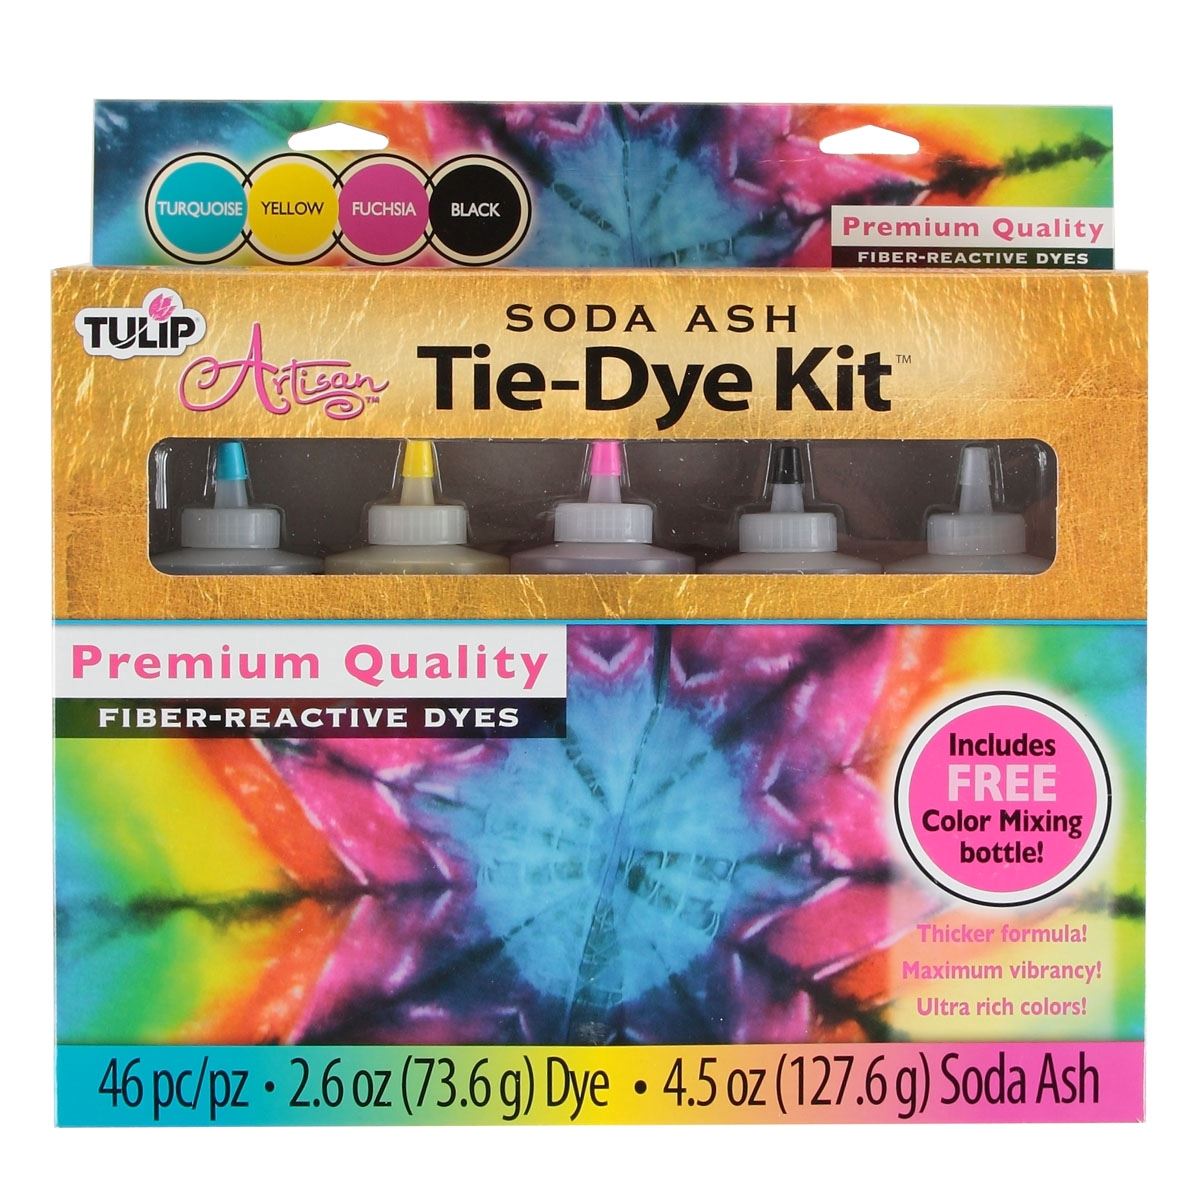 How to Make Soda Ash for Tie Dye